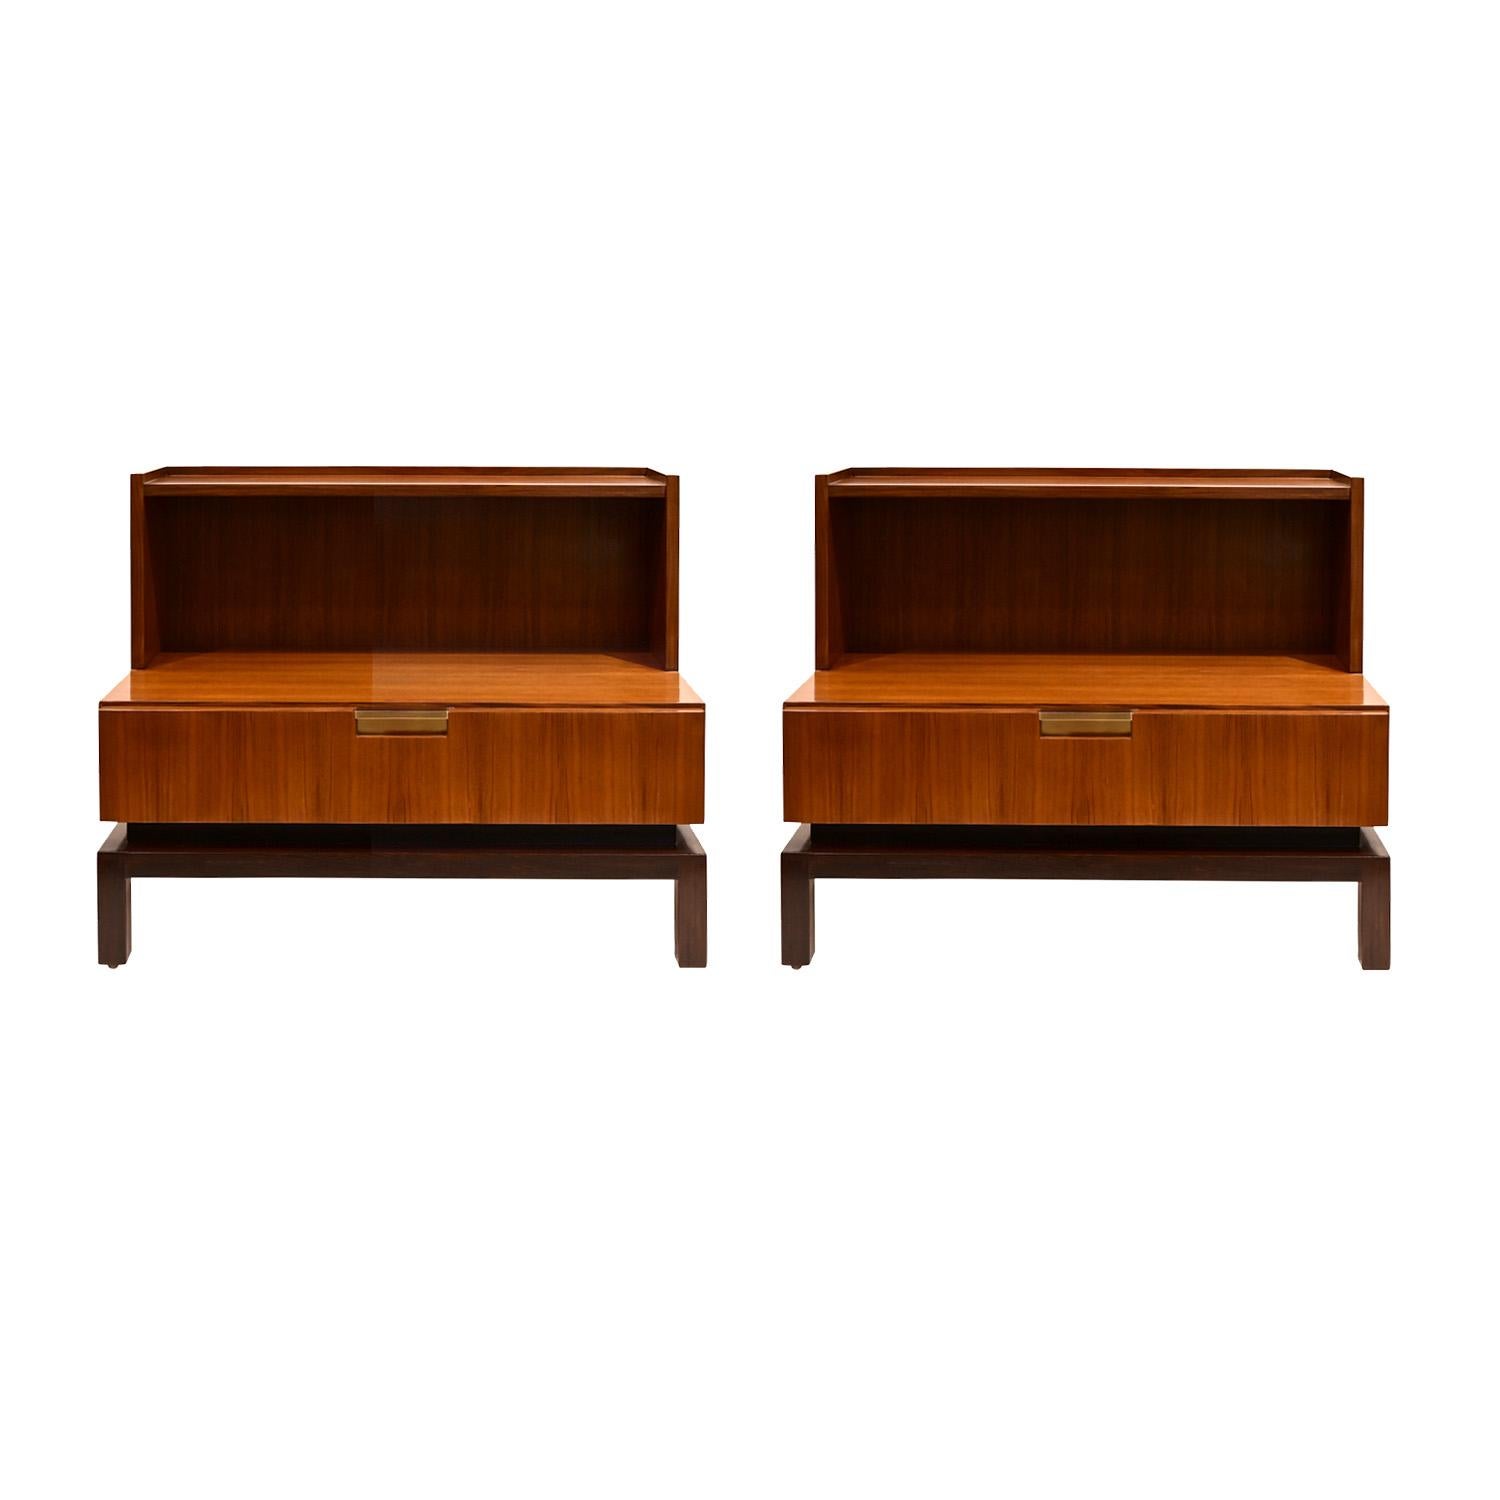 Pair of tailored bedside tables in walnut with dark palmwood bases and bronze pulls by De Coene Freres, Belgium 1960's. These are beautifully crafted and proportioned. The backs are completely finished.